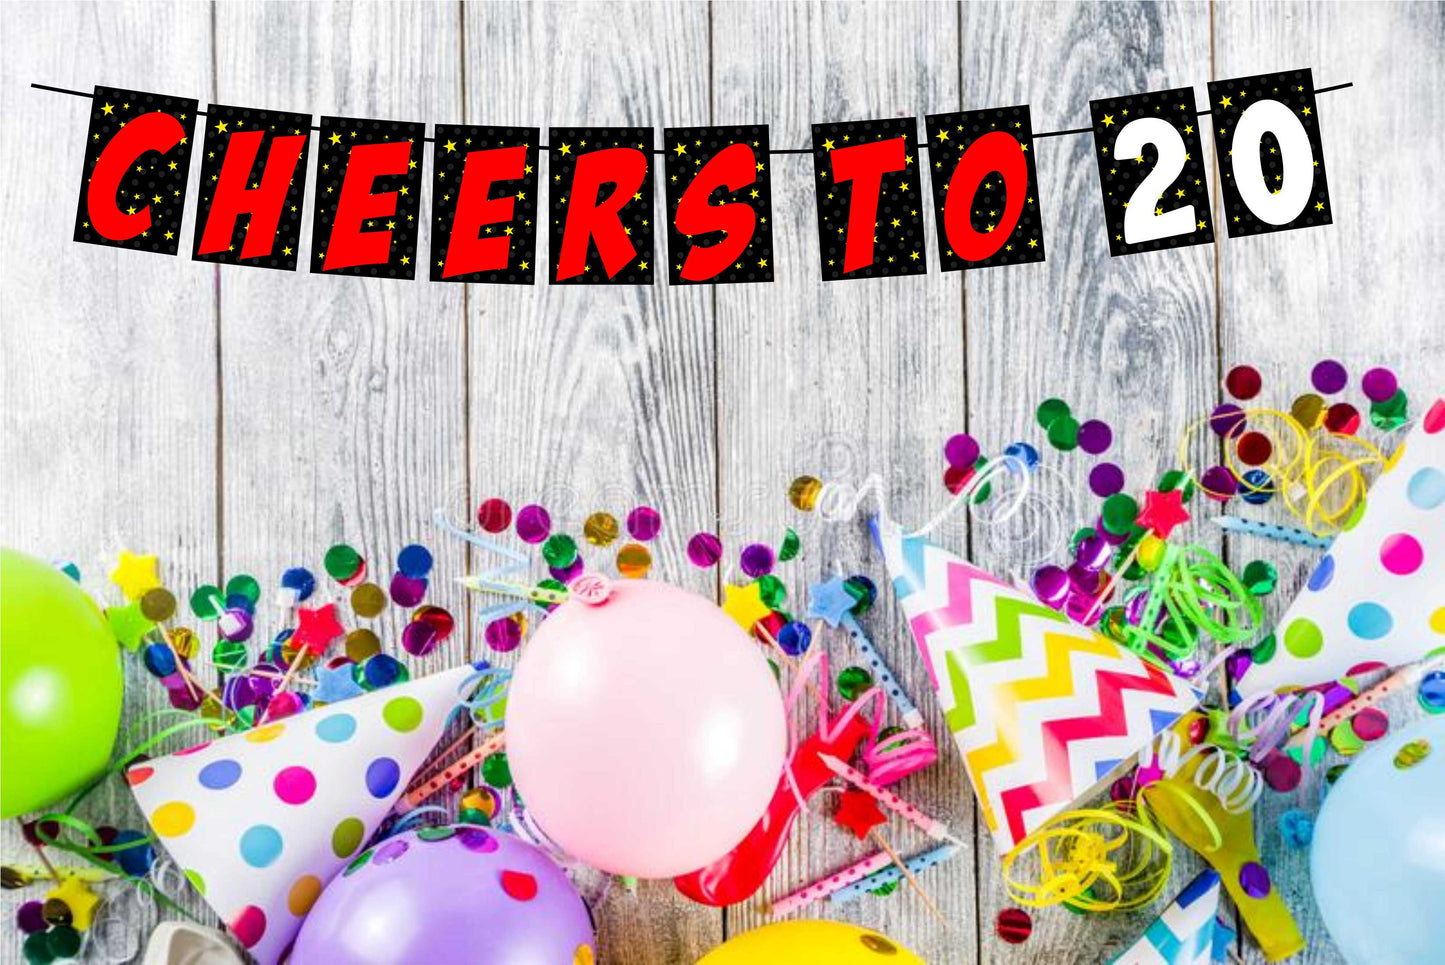 Cheers to 20 Birthday Banner for Photo Shoot Backdrop and Theme Party